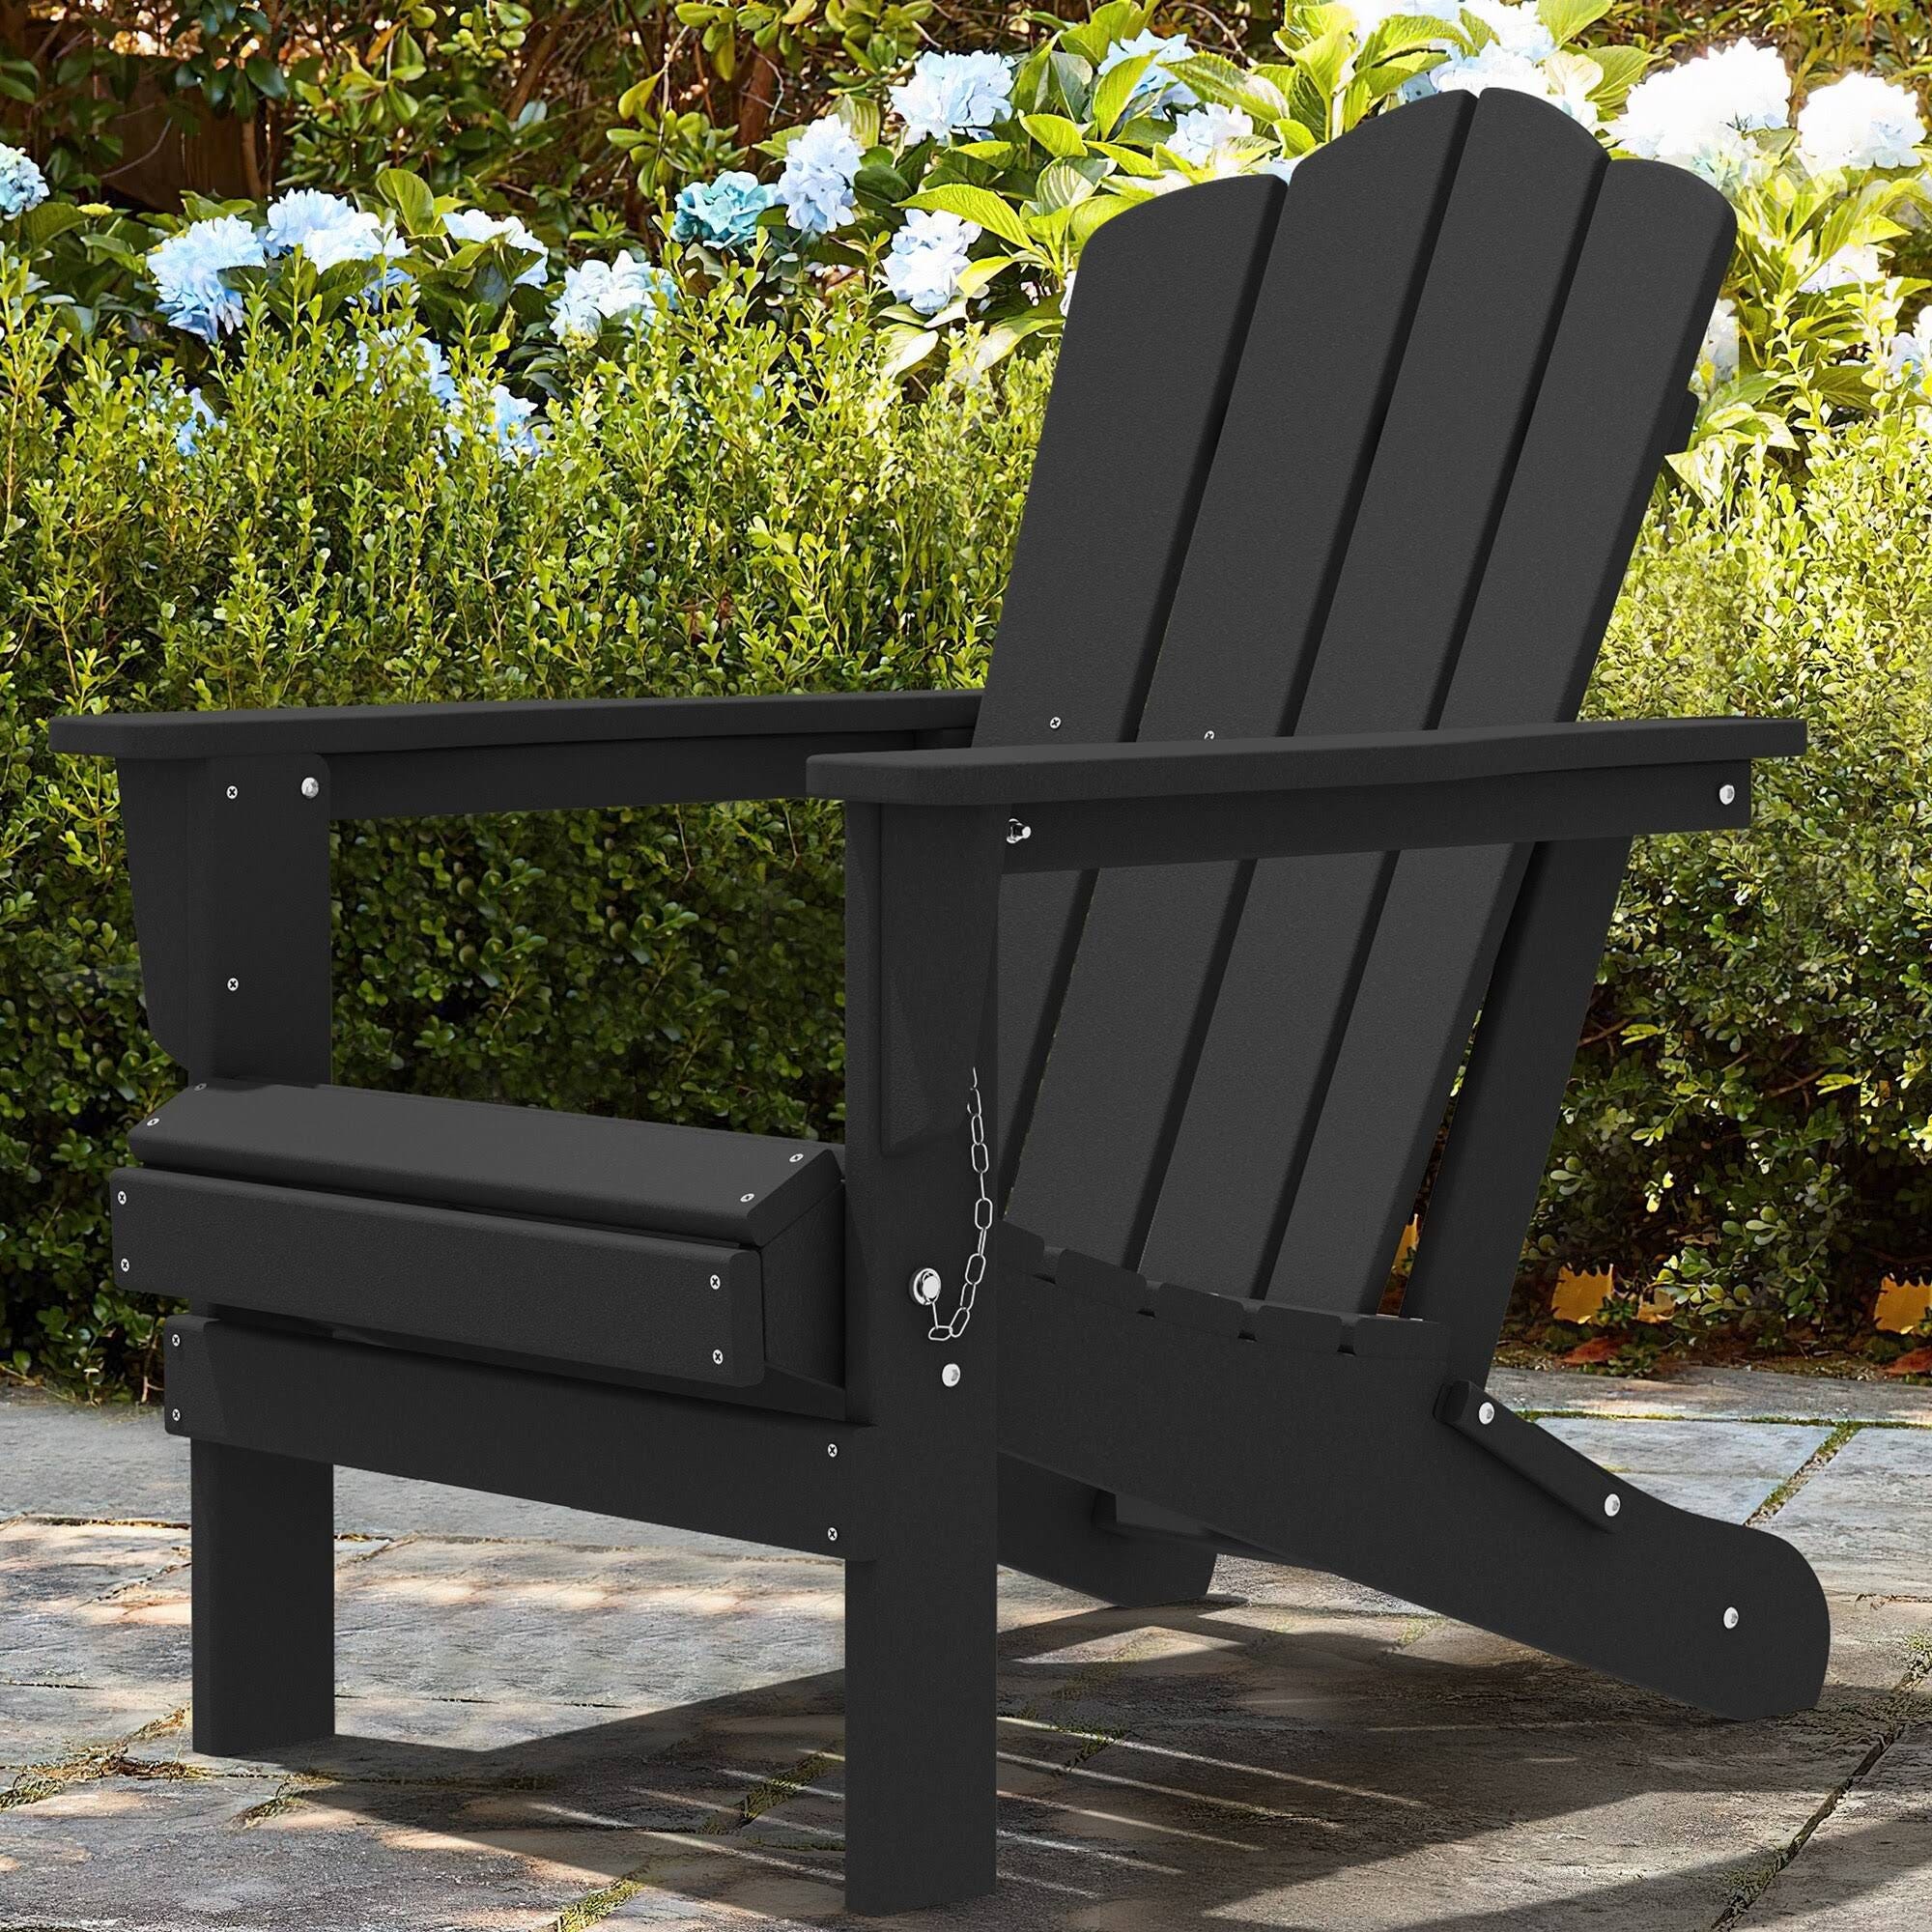 Durable Weather-Resistant HDPE Adirondack Chair with Aesthetic and Comfortable Design | Image